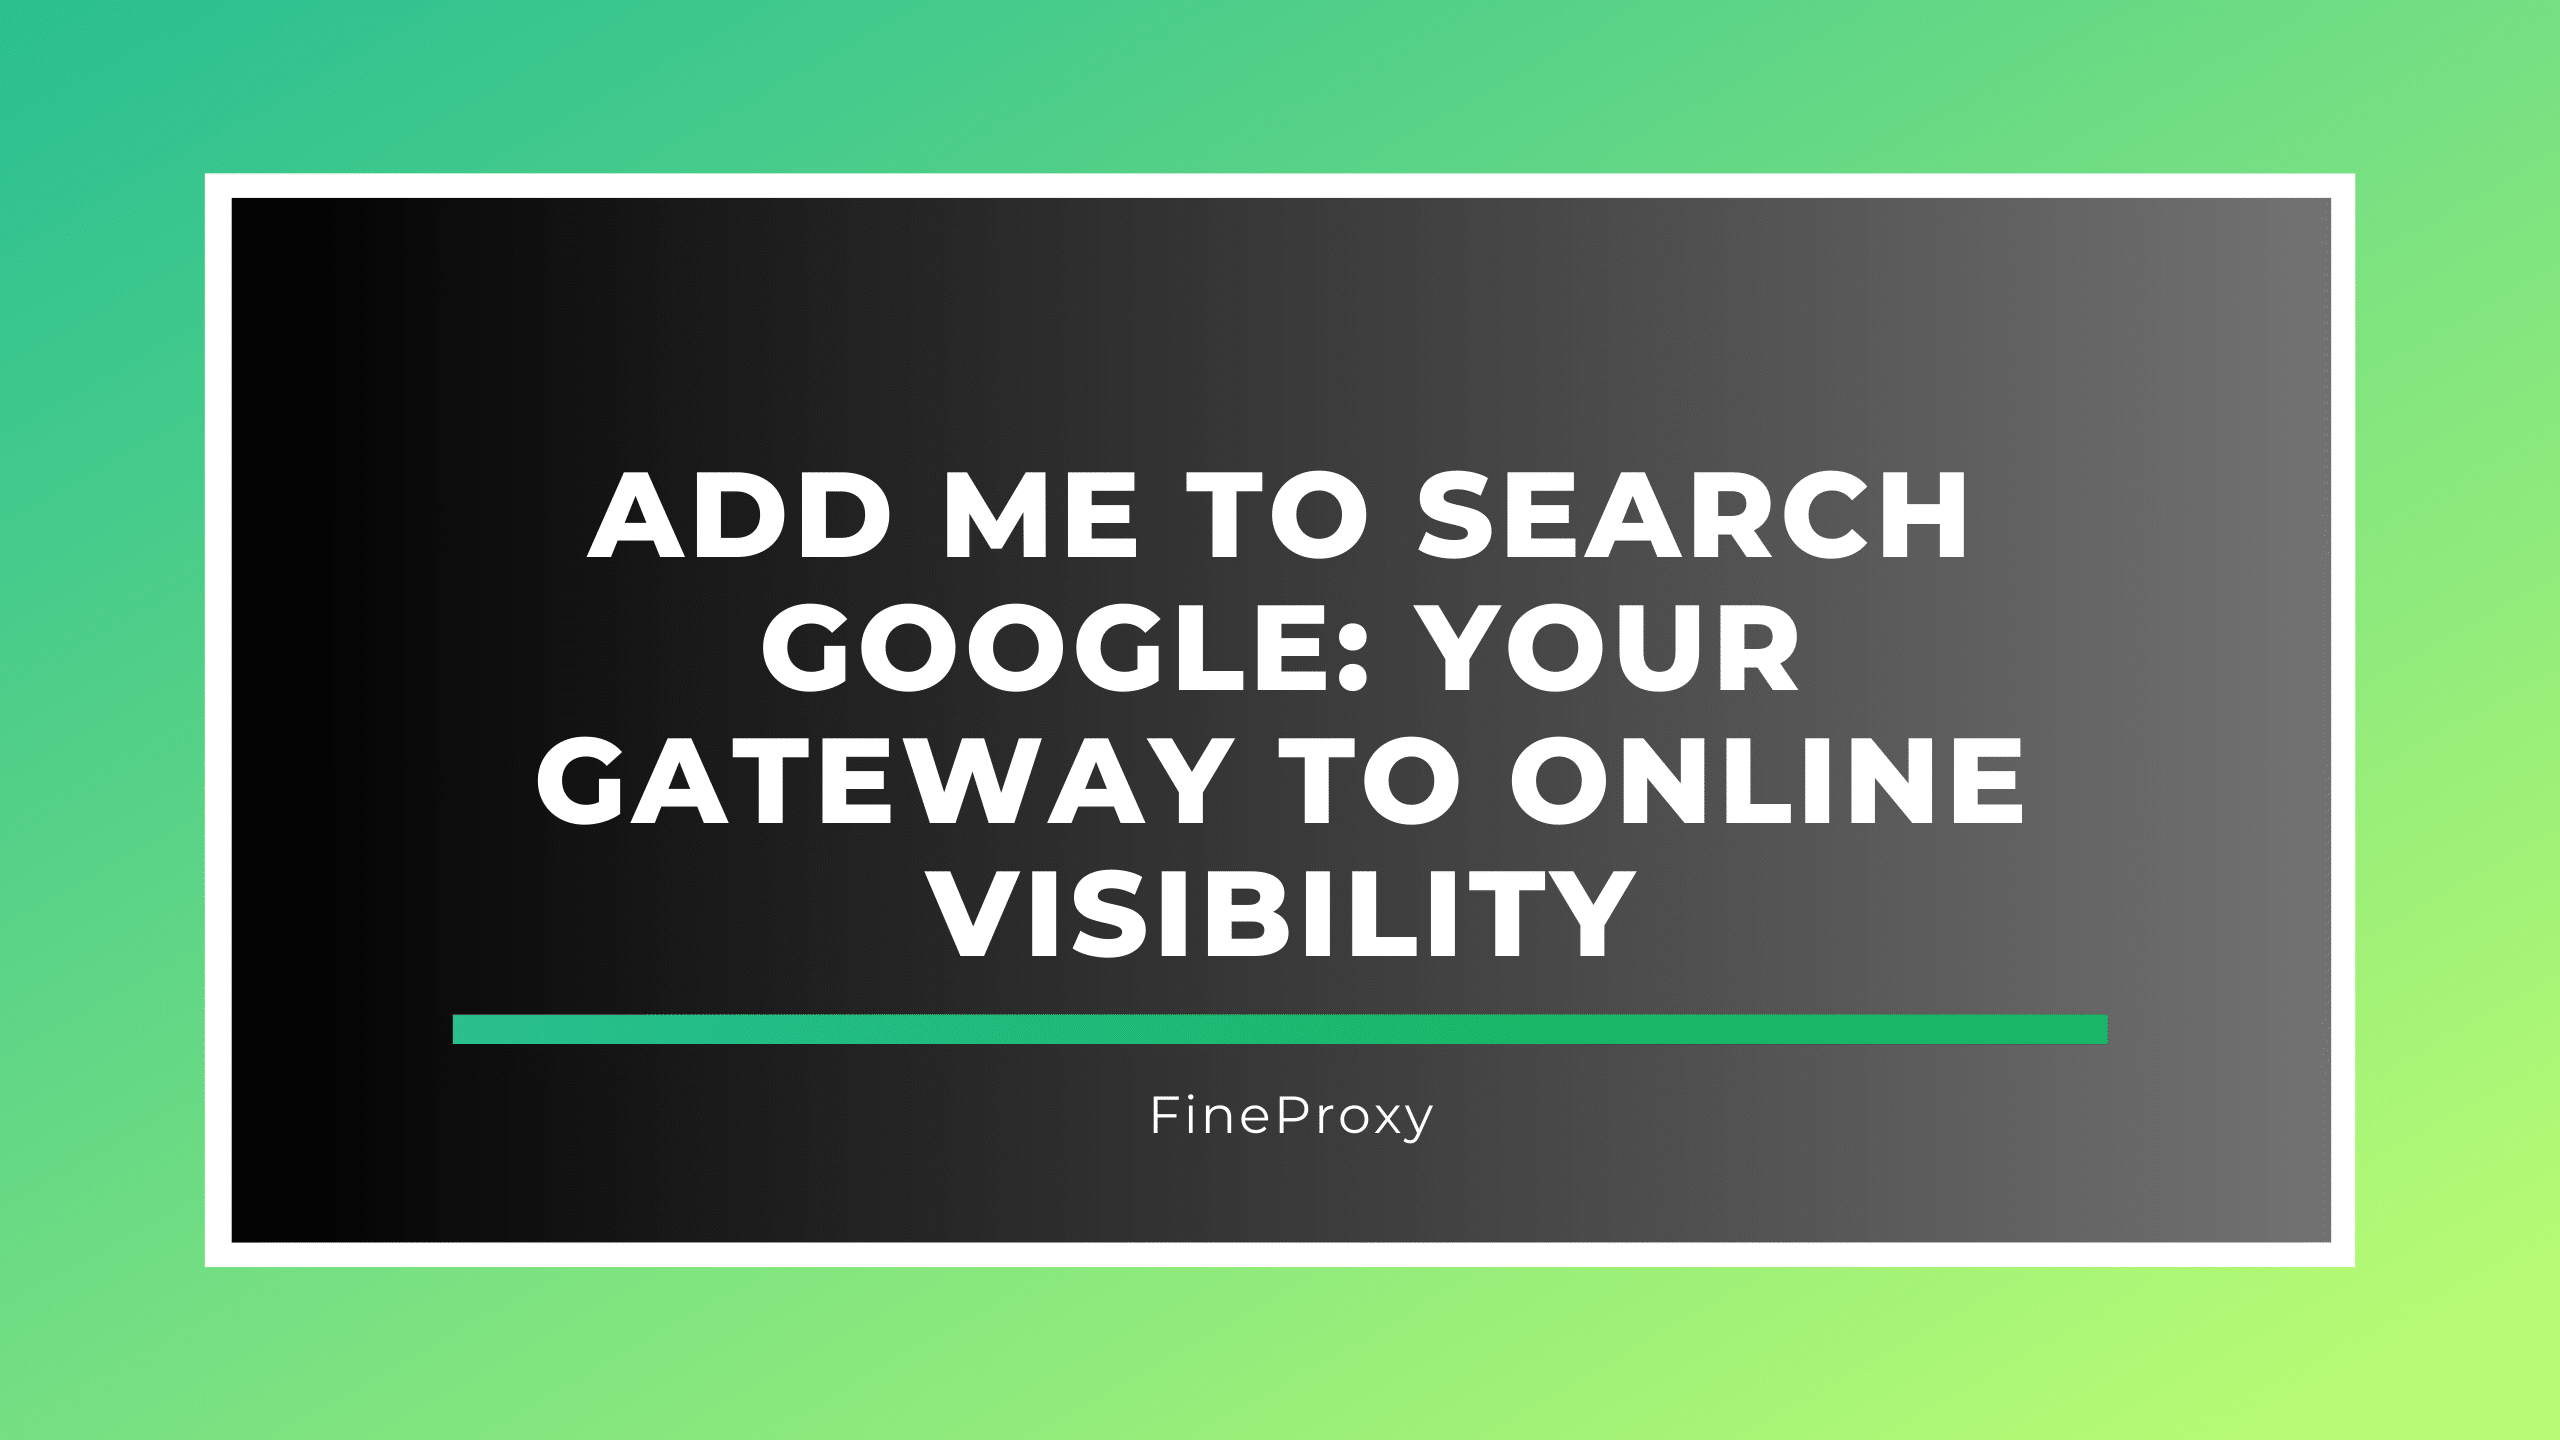 Add Me To Search Google: Your Gateway to Online Visibility